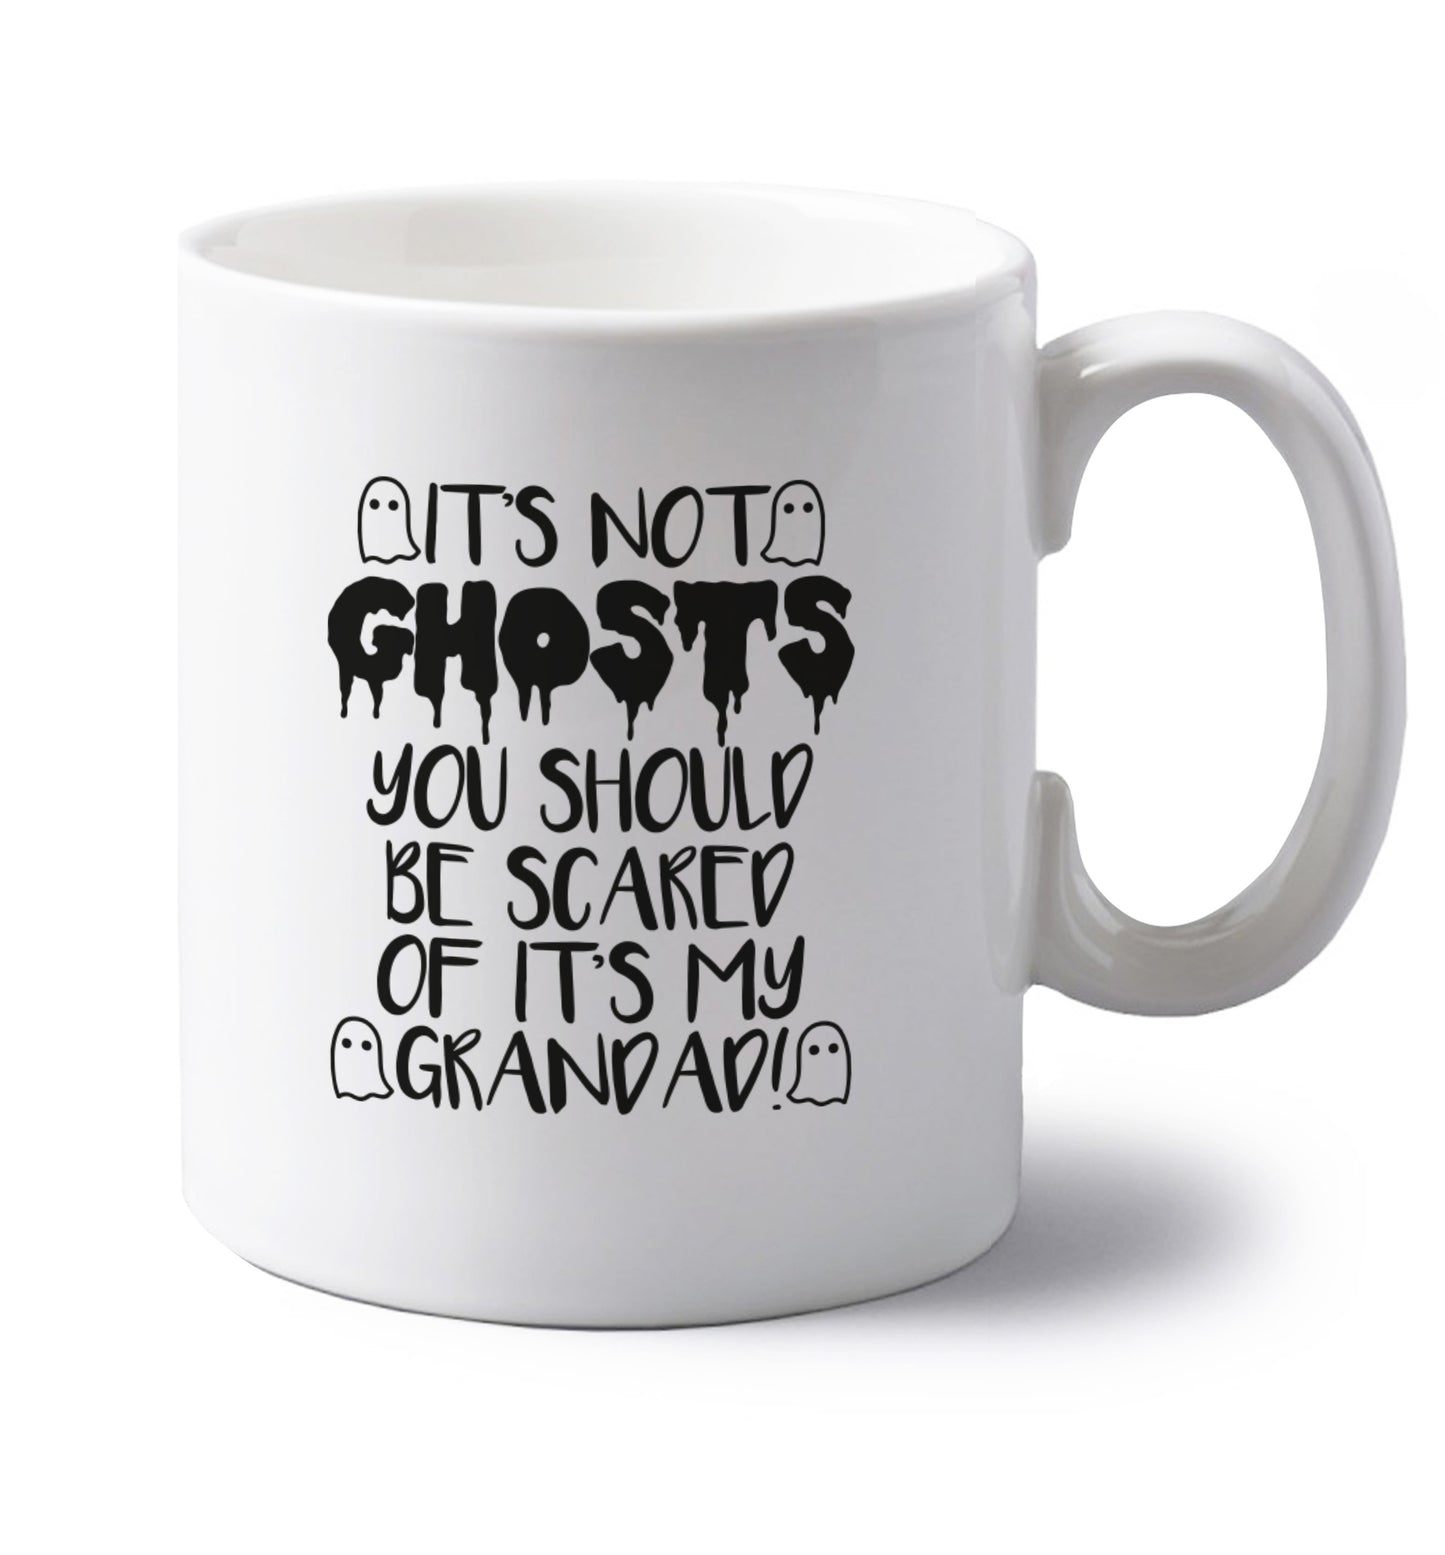 It's not ghosts you should be scared of it's my grandad! left handed white ceramic mug 